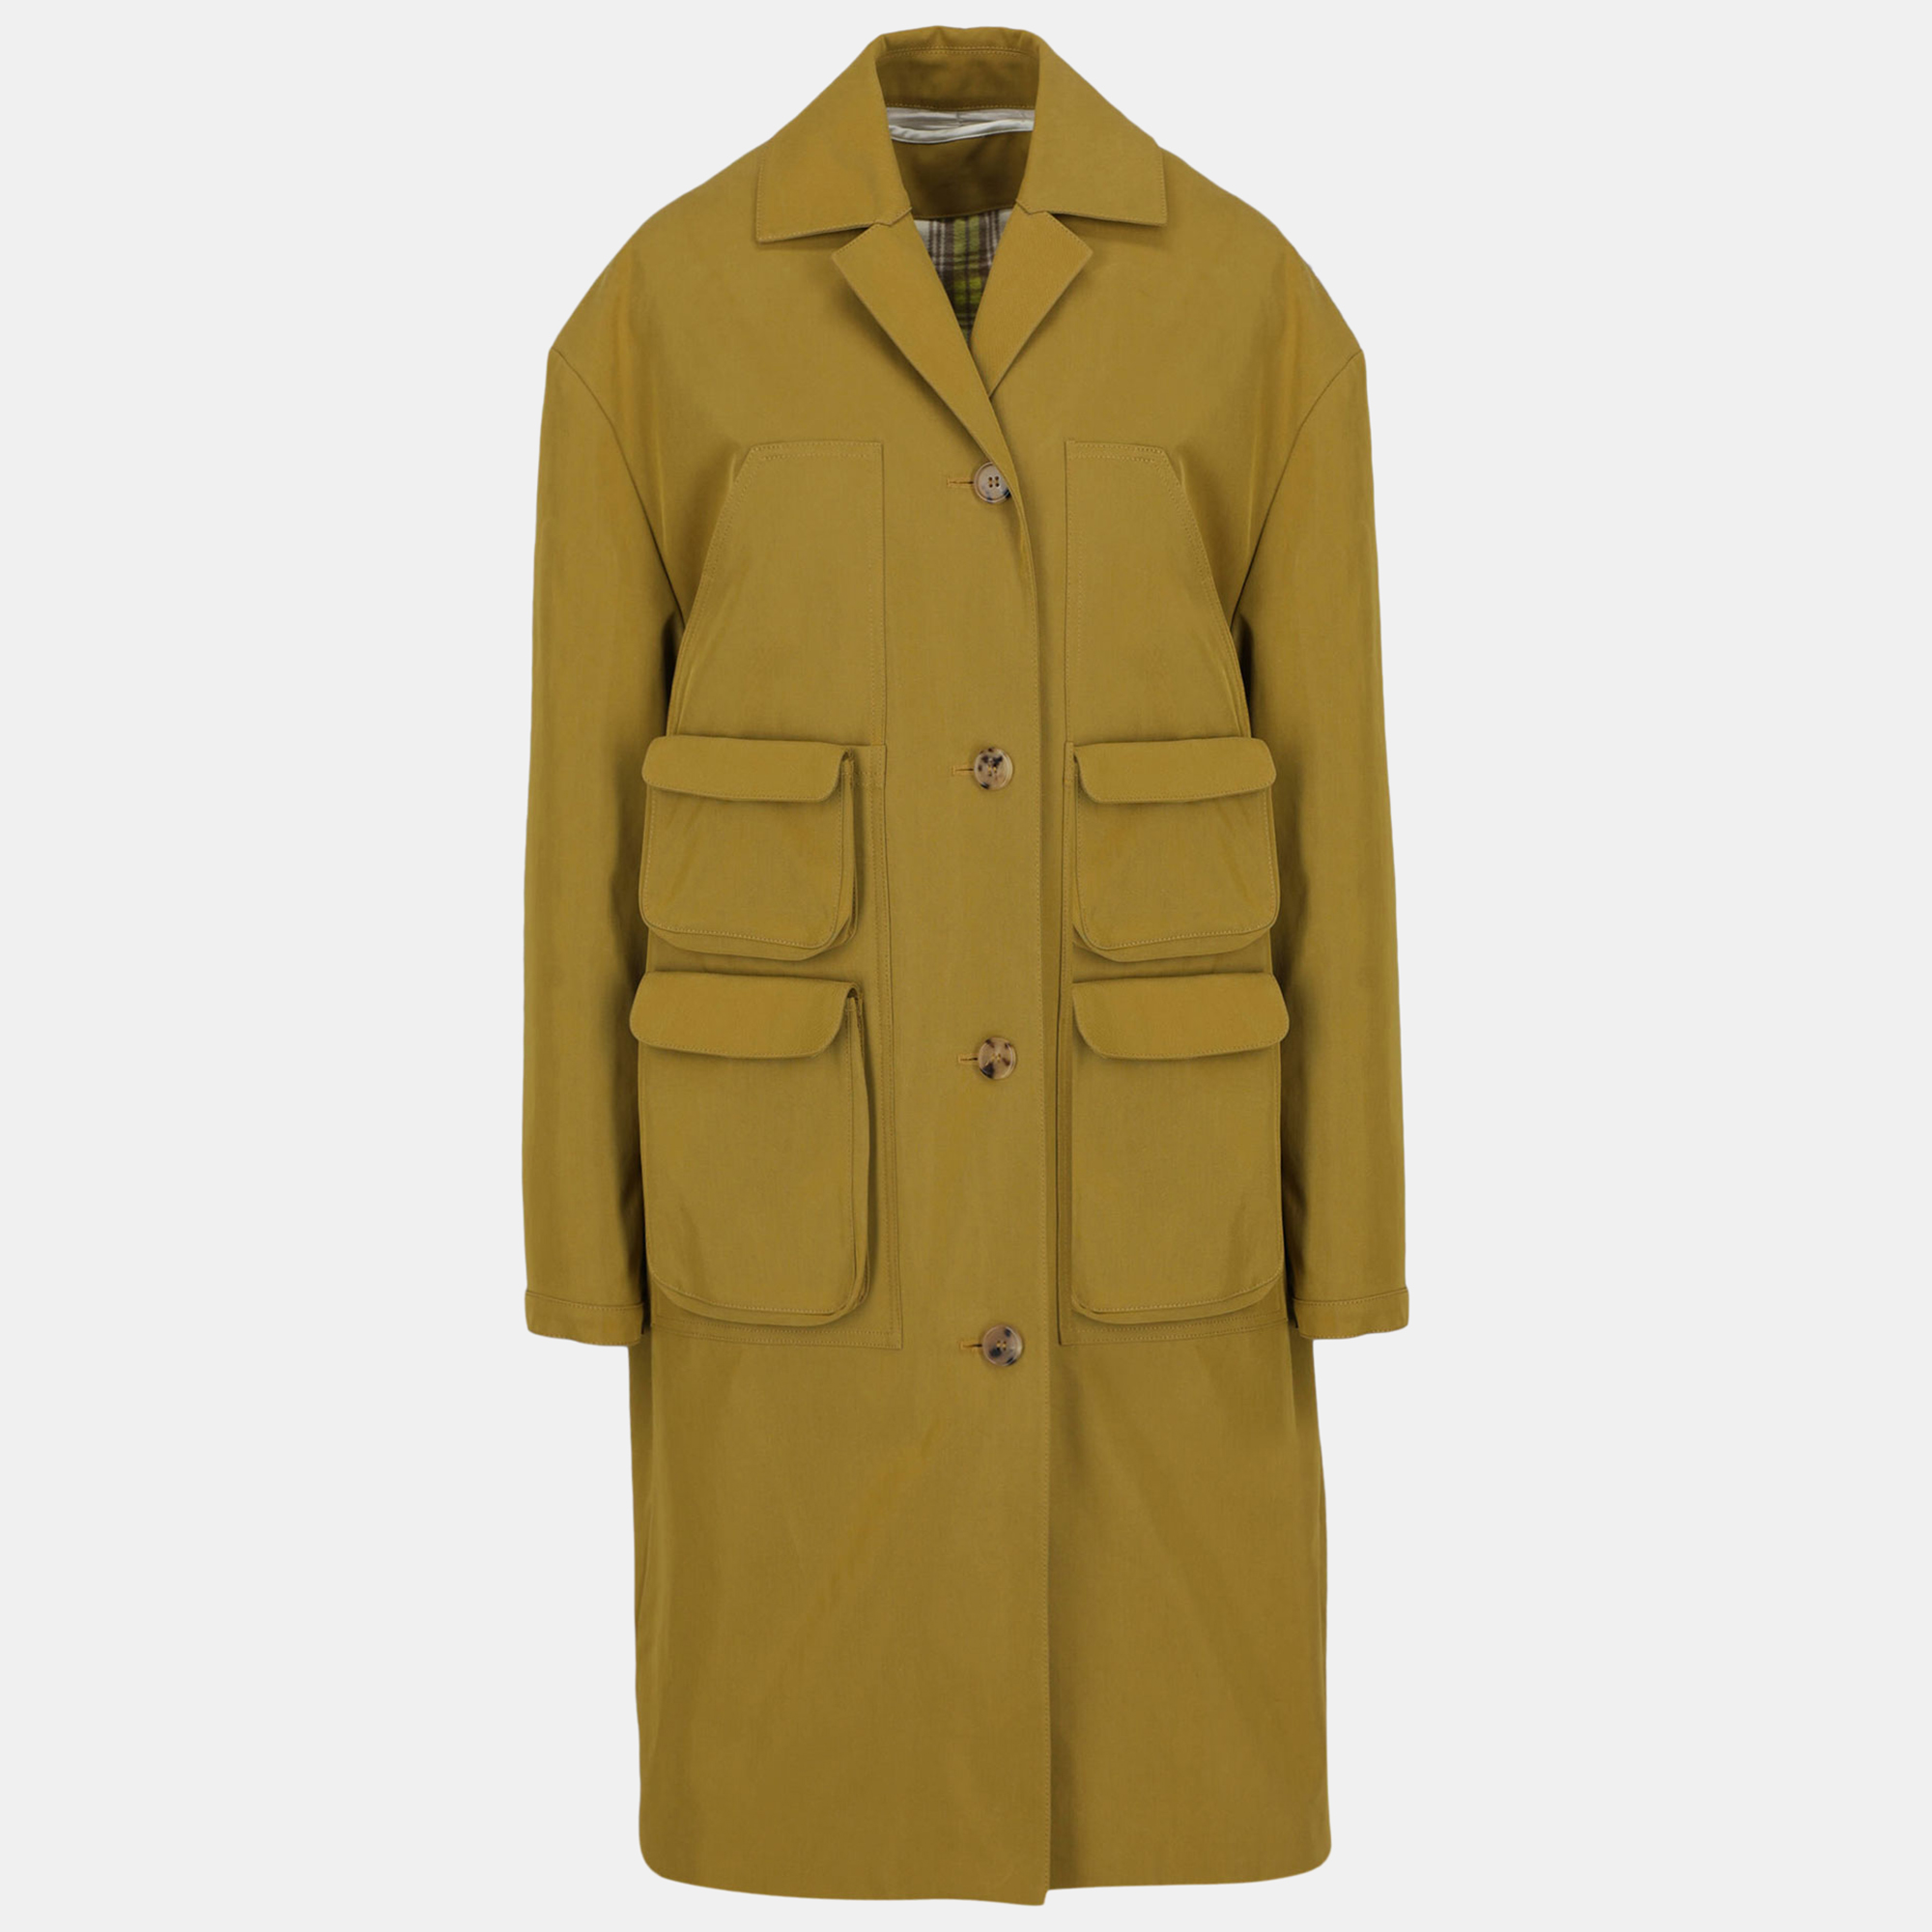 Off-White Women's Cotton Single Breasted Coat - Yellow - S